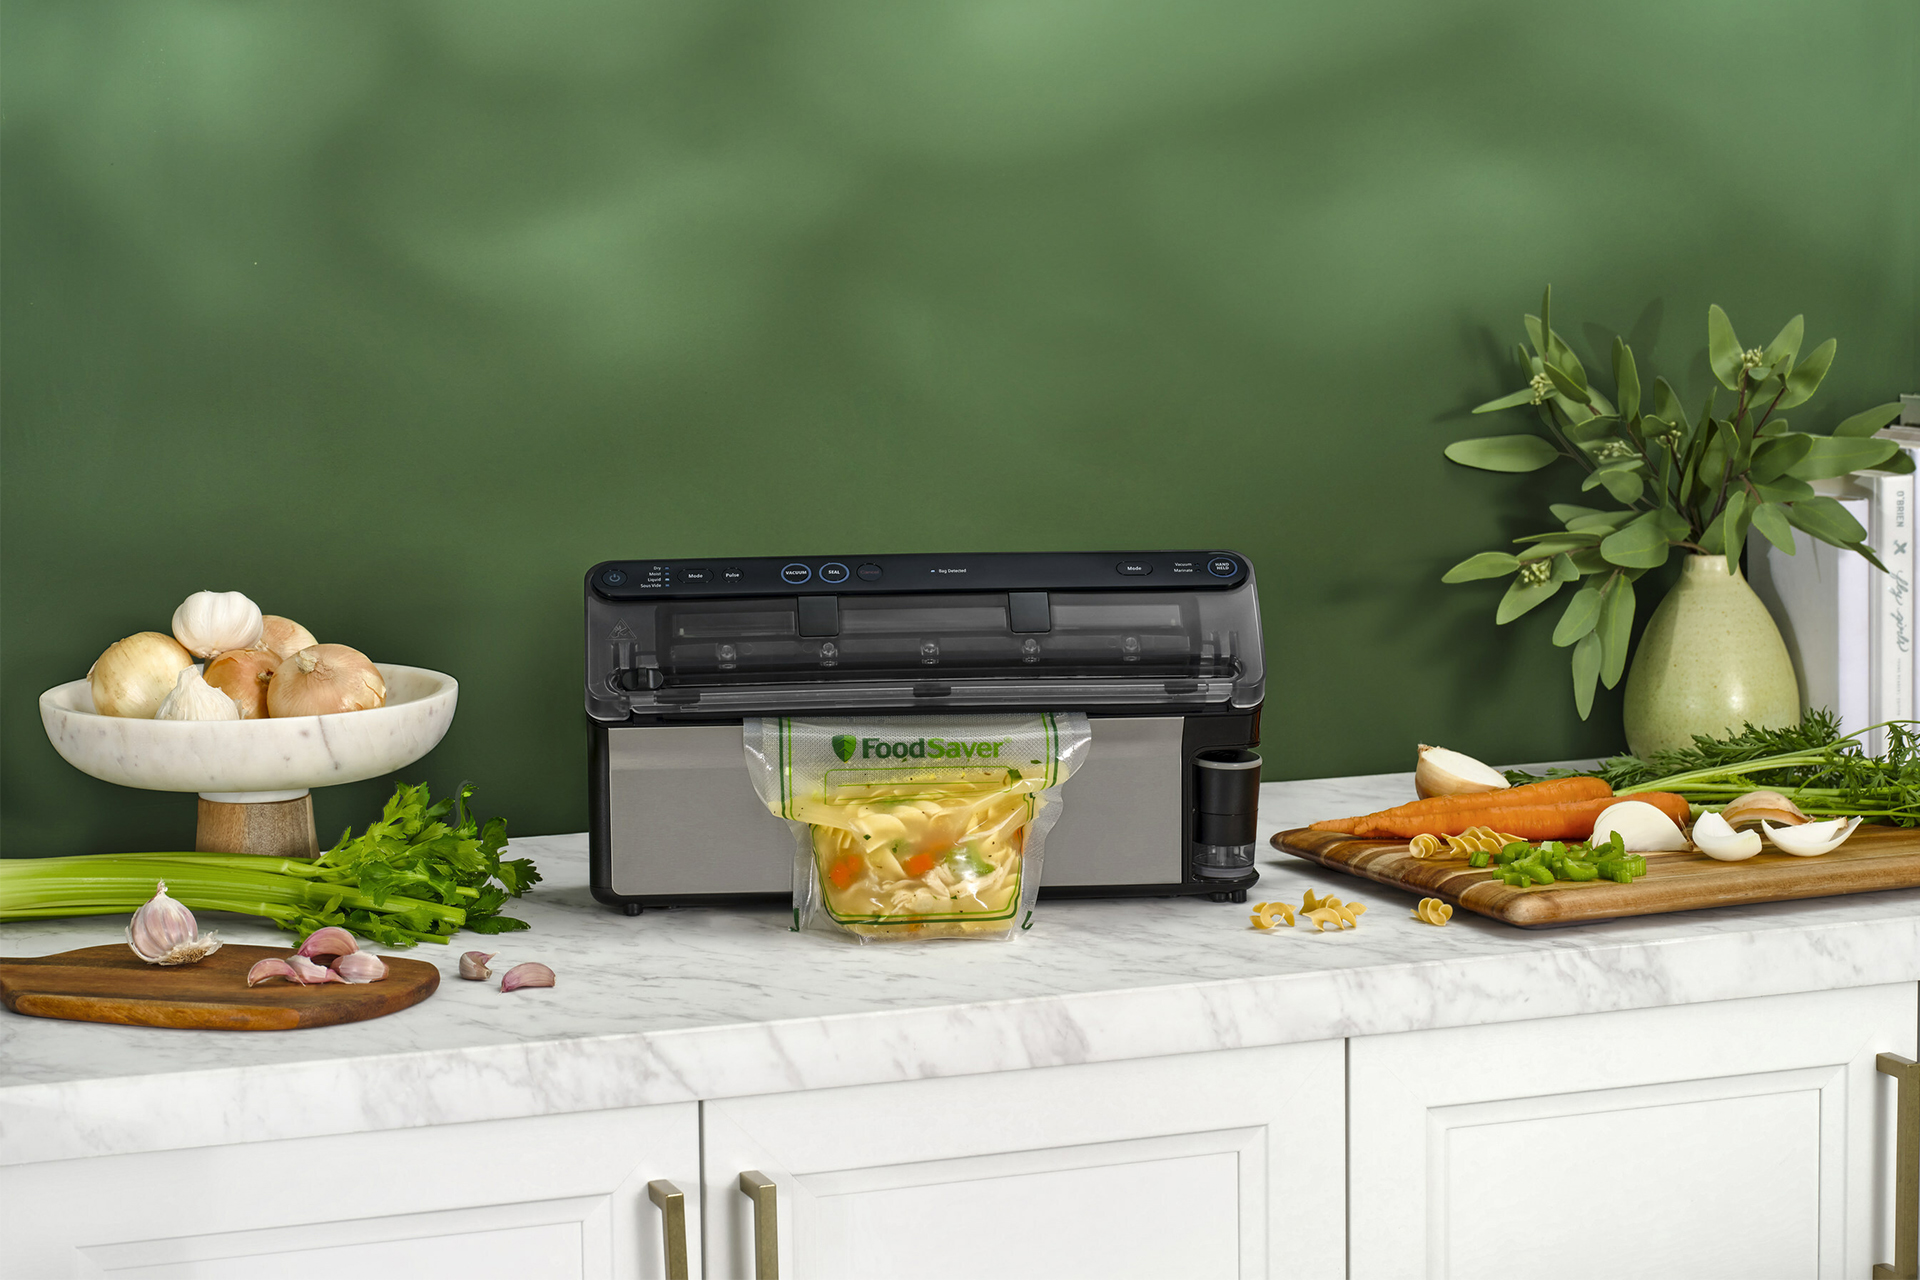 FoodSaver - Want one of our favorite vacuum-sealers? Follow the